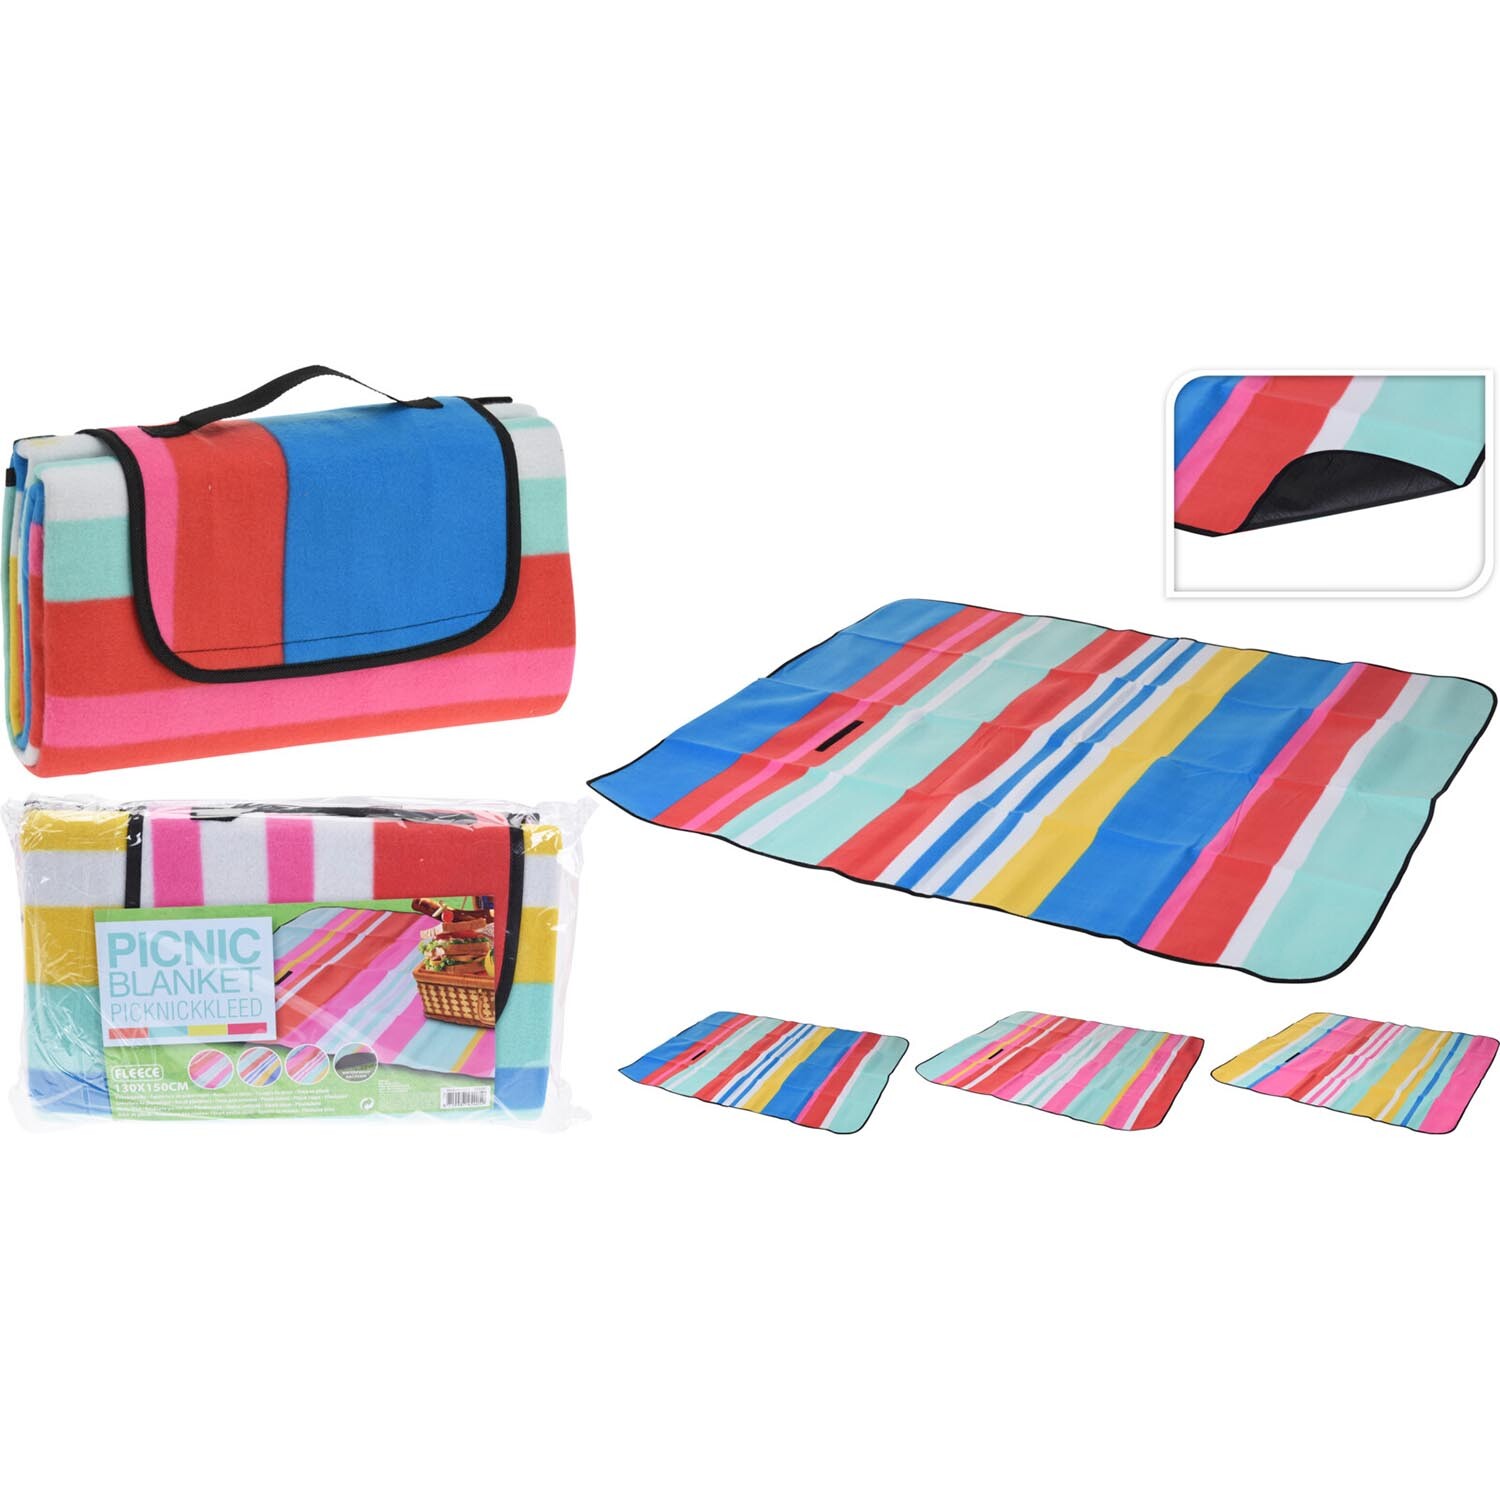 Picnic Blanket with Bright Stripes Image